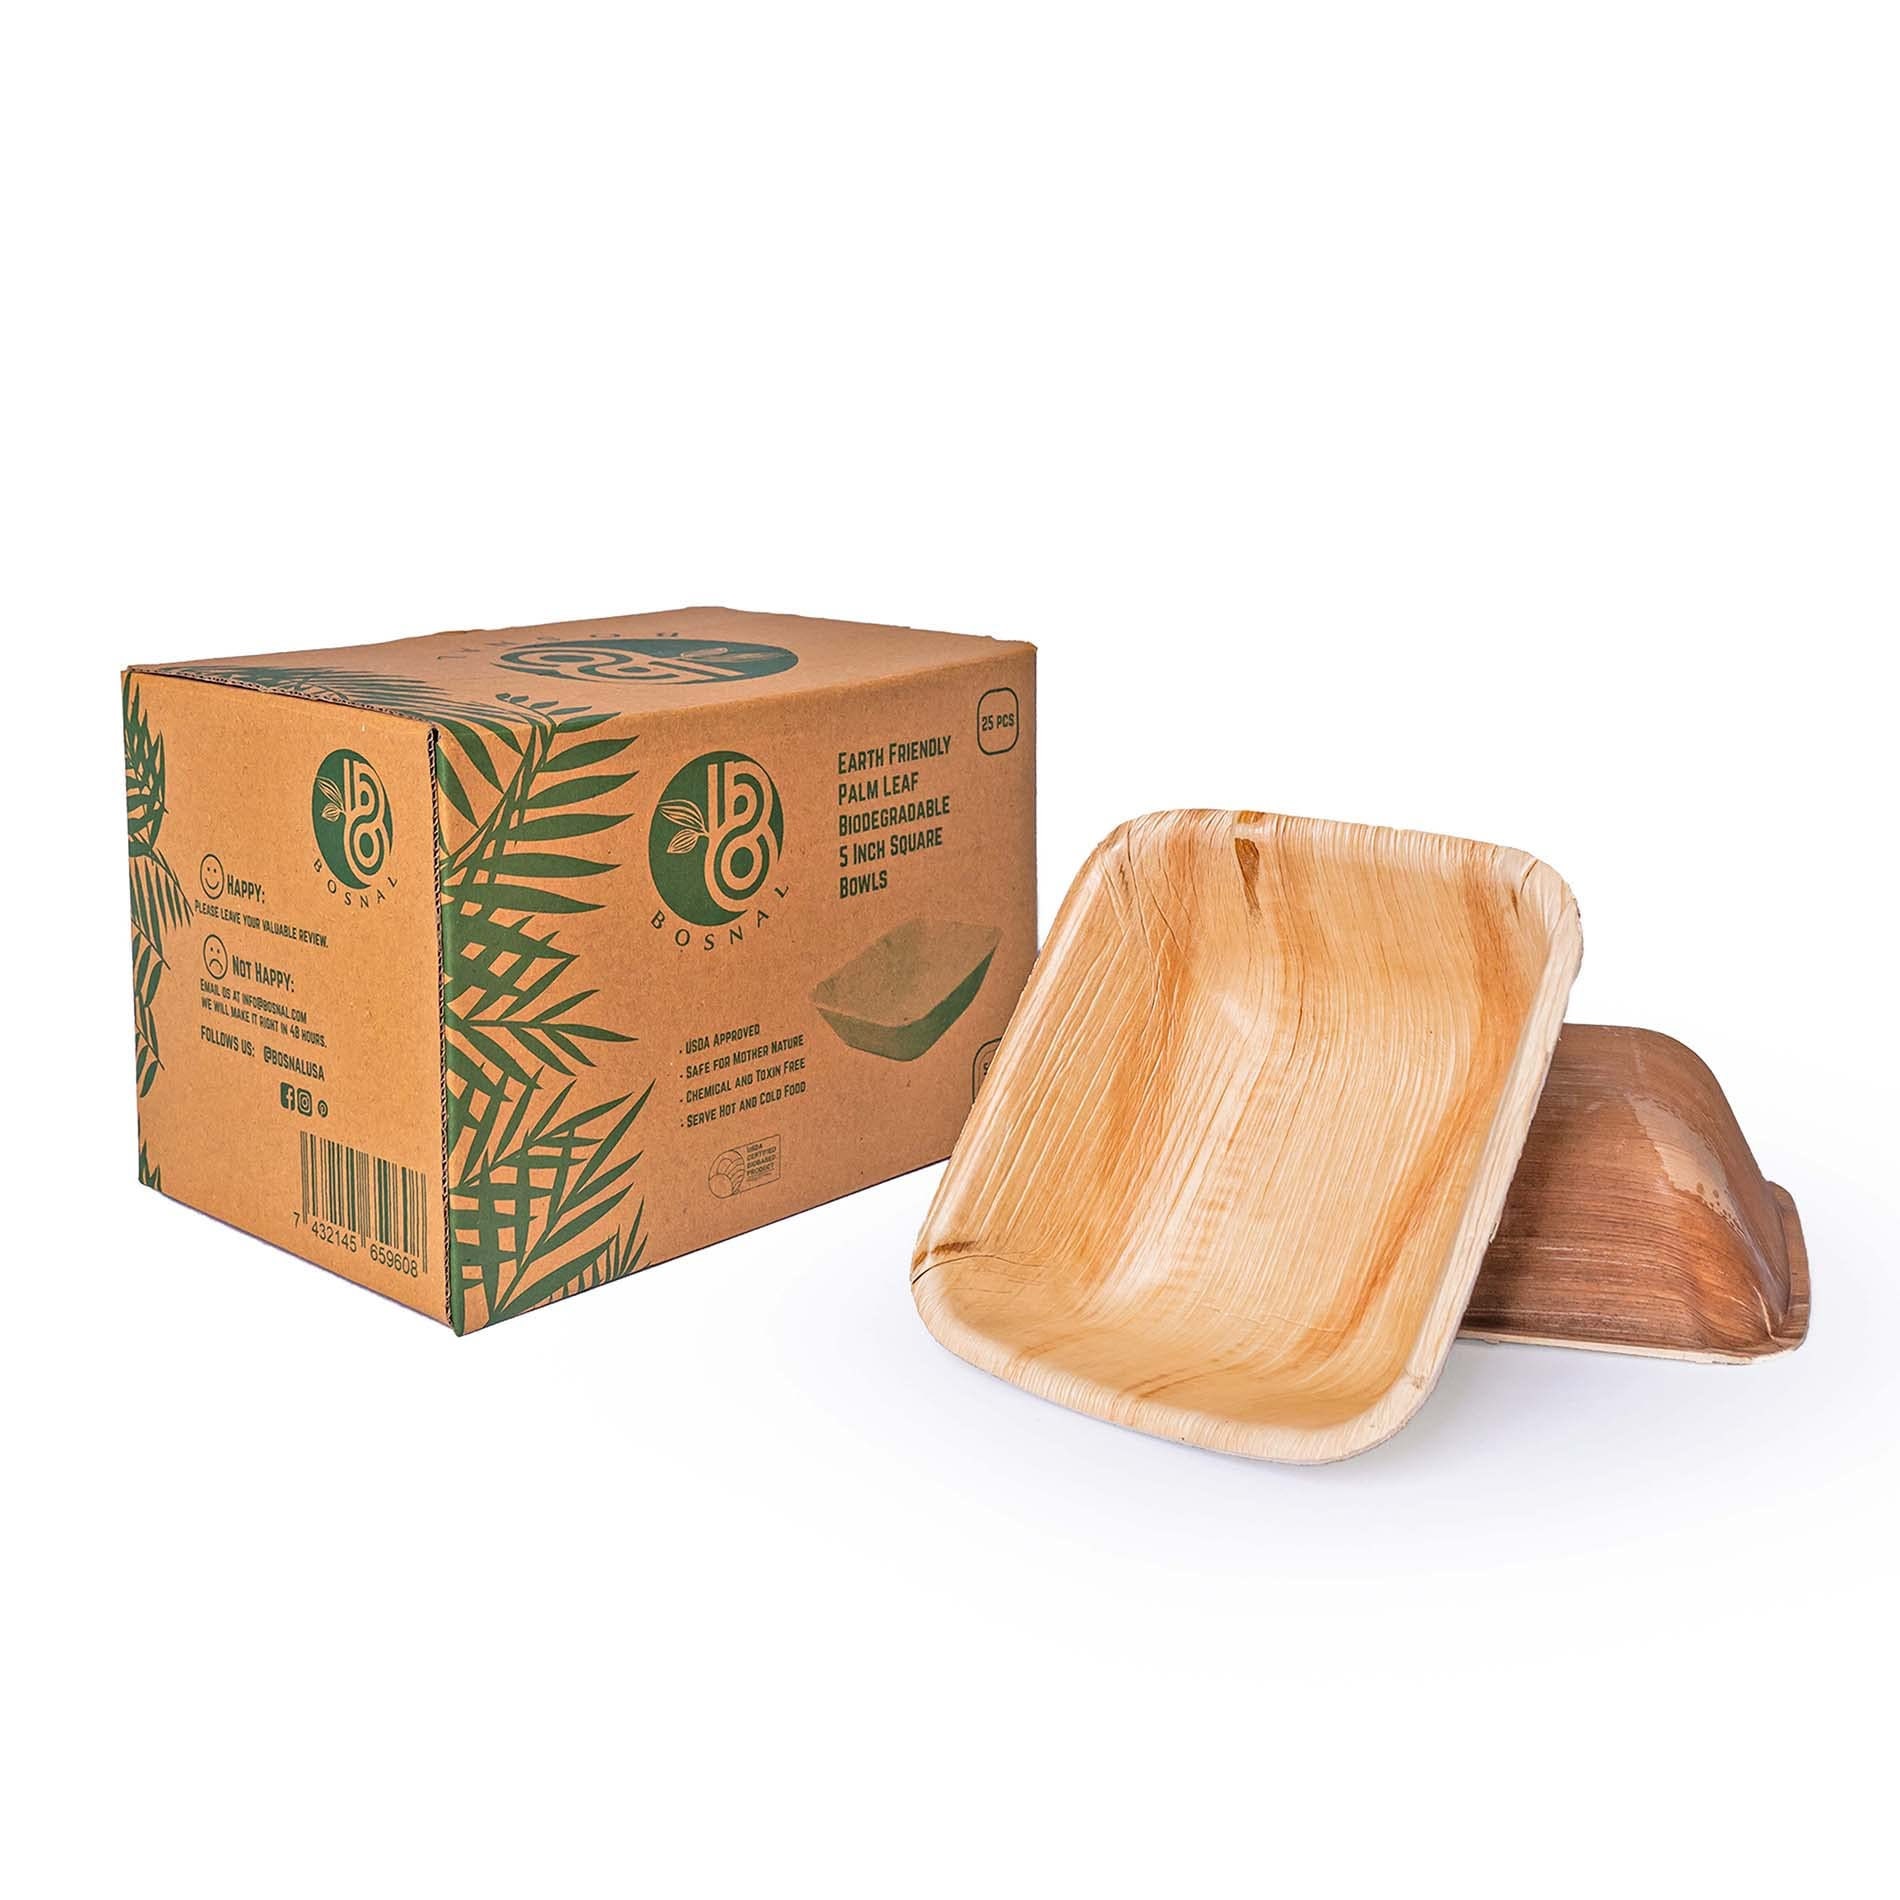 N185 Cardboard Premium Compostable Biodegradable Food Container Bowls 32oz  x 50